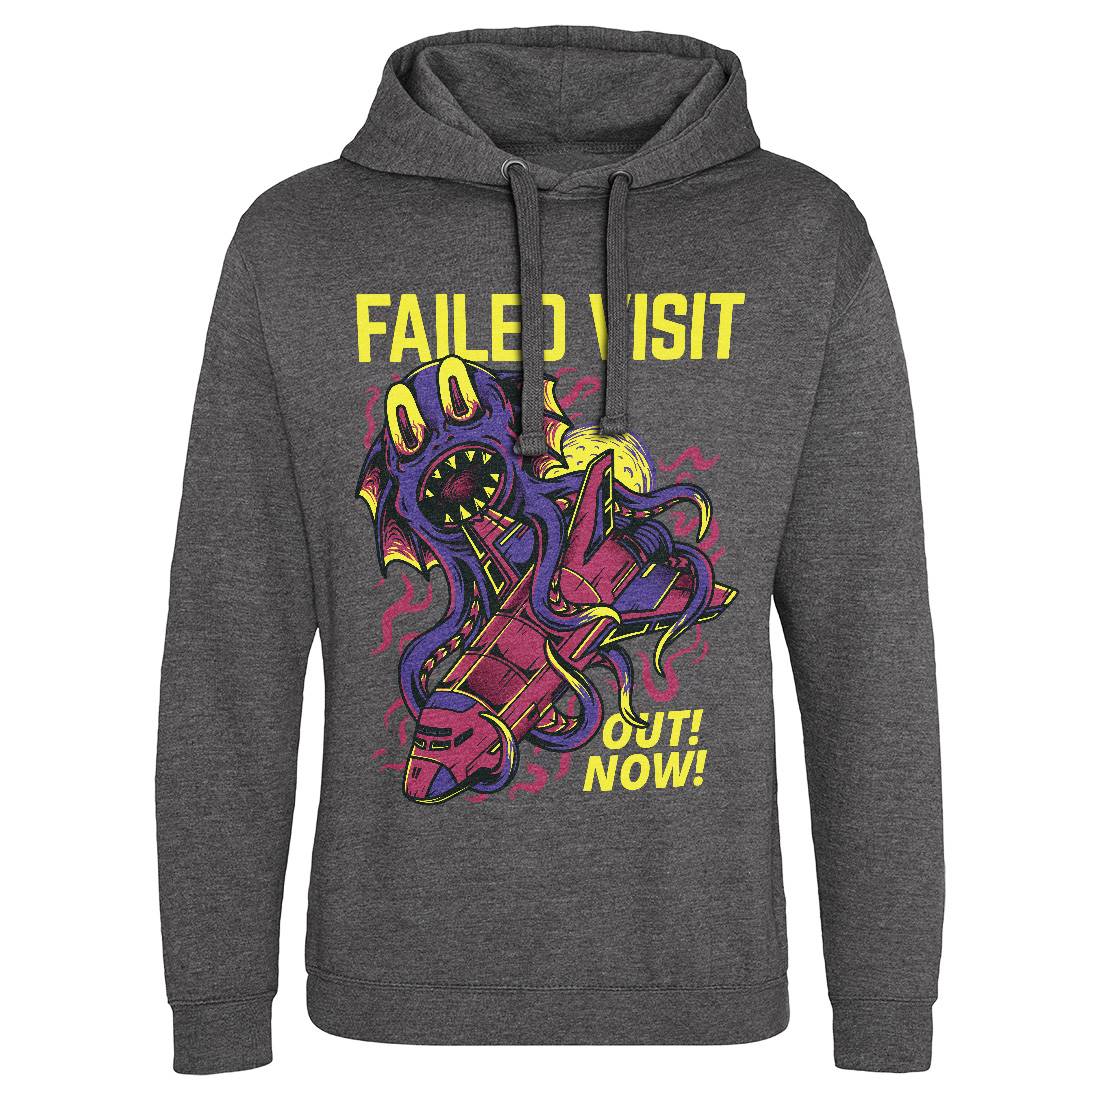 Failed Visit Mens Hoodie Without Pocket Space D769